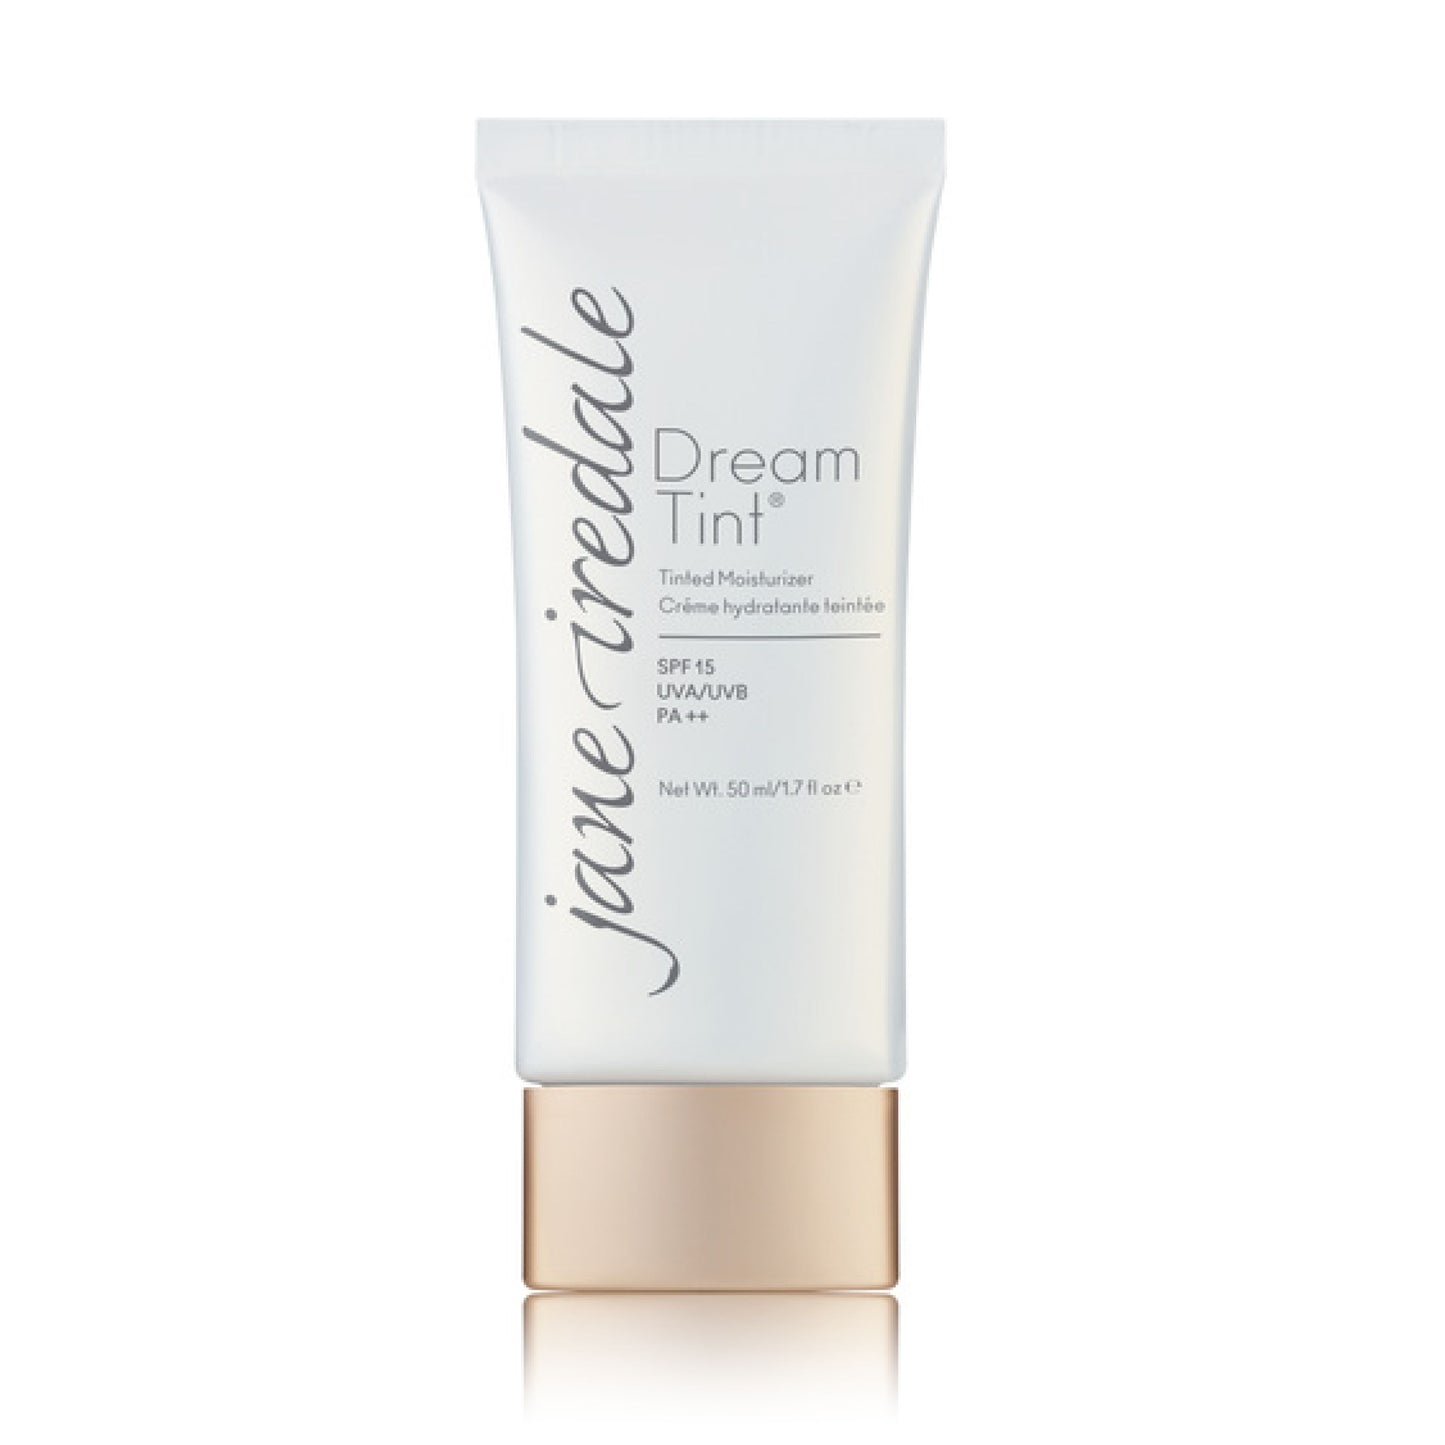 Jane Iredale Dream tint tinted moisturiser - Formulated with lightweight minerals, a tinted moisturiser that not only hydrates and provides sheer to medium coverage, but helps prevent trans-epidermal water loss. Infinity Skin Clinic Surry Hills